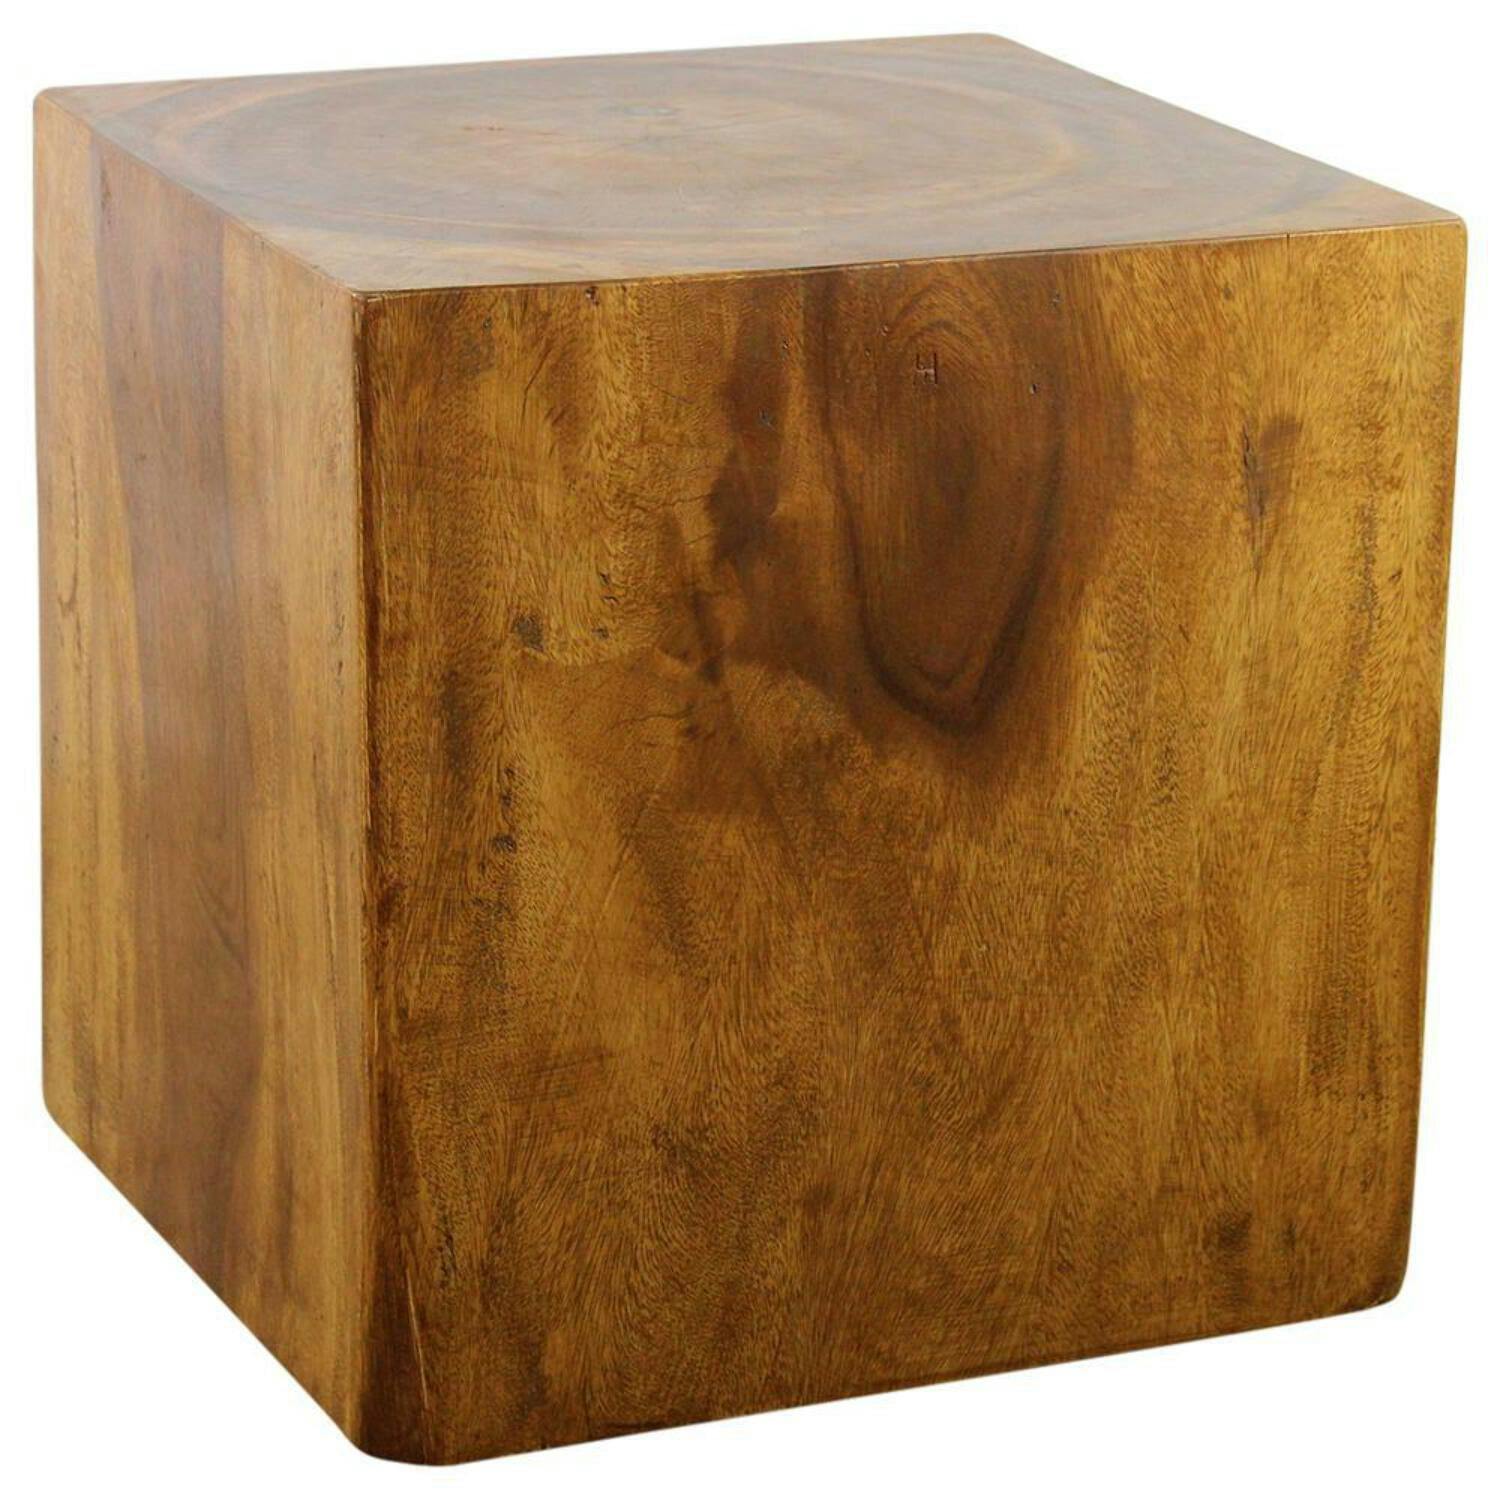 Artisan Crafted Eco-Friendly Oak Wood Cube Coffee Table